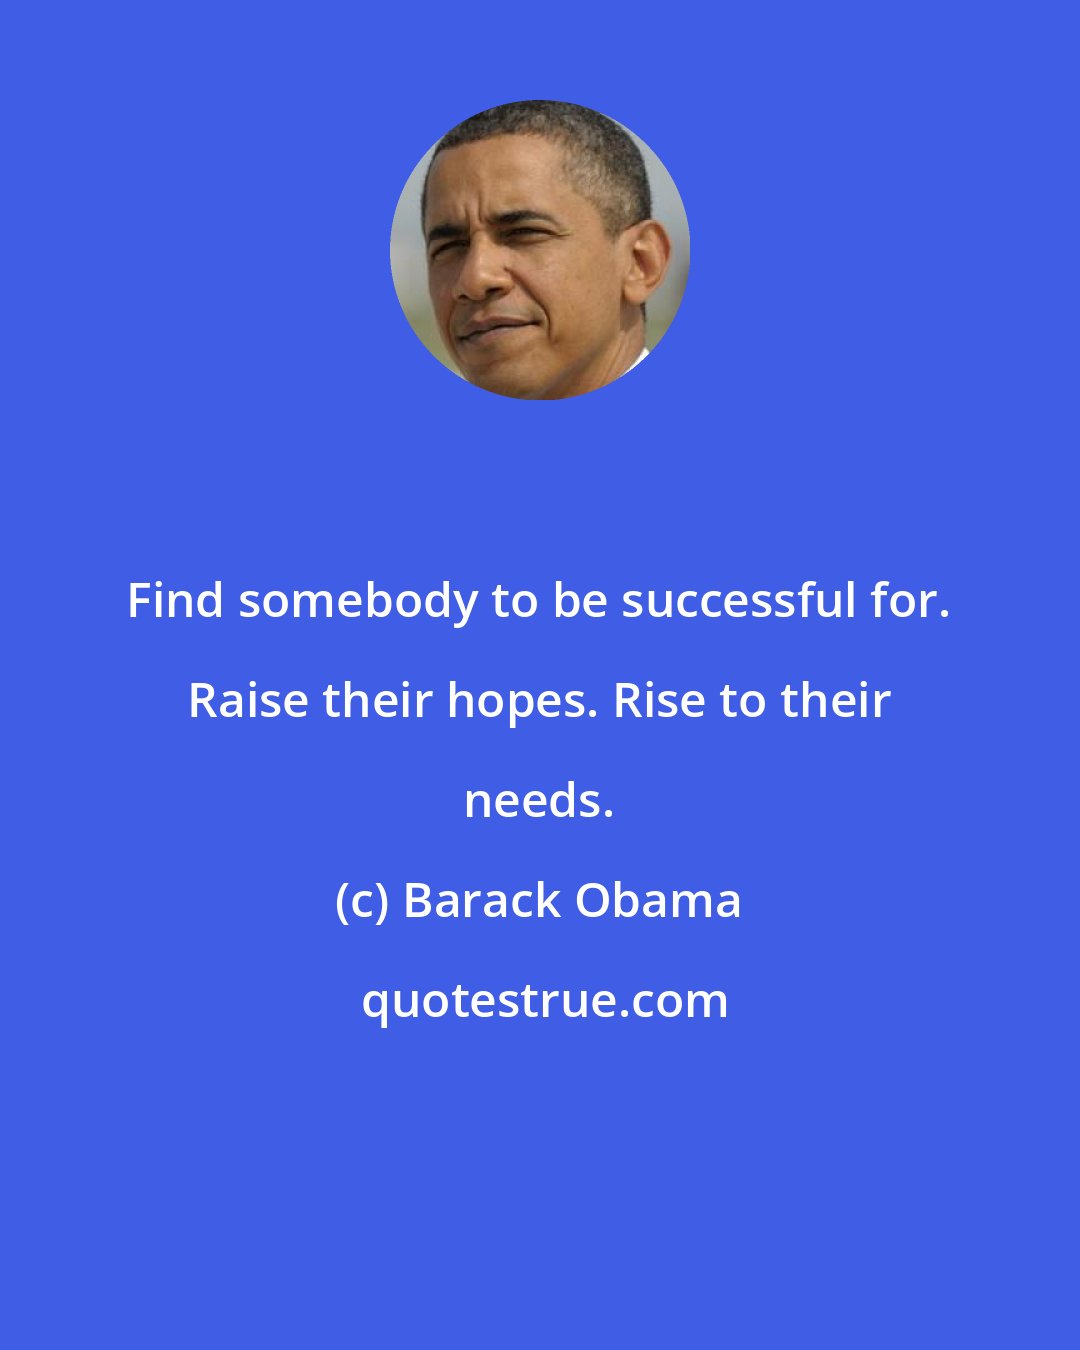 Barack Obama: Find somebody to be successful for. Raise their hopes. Rise to their needs.